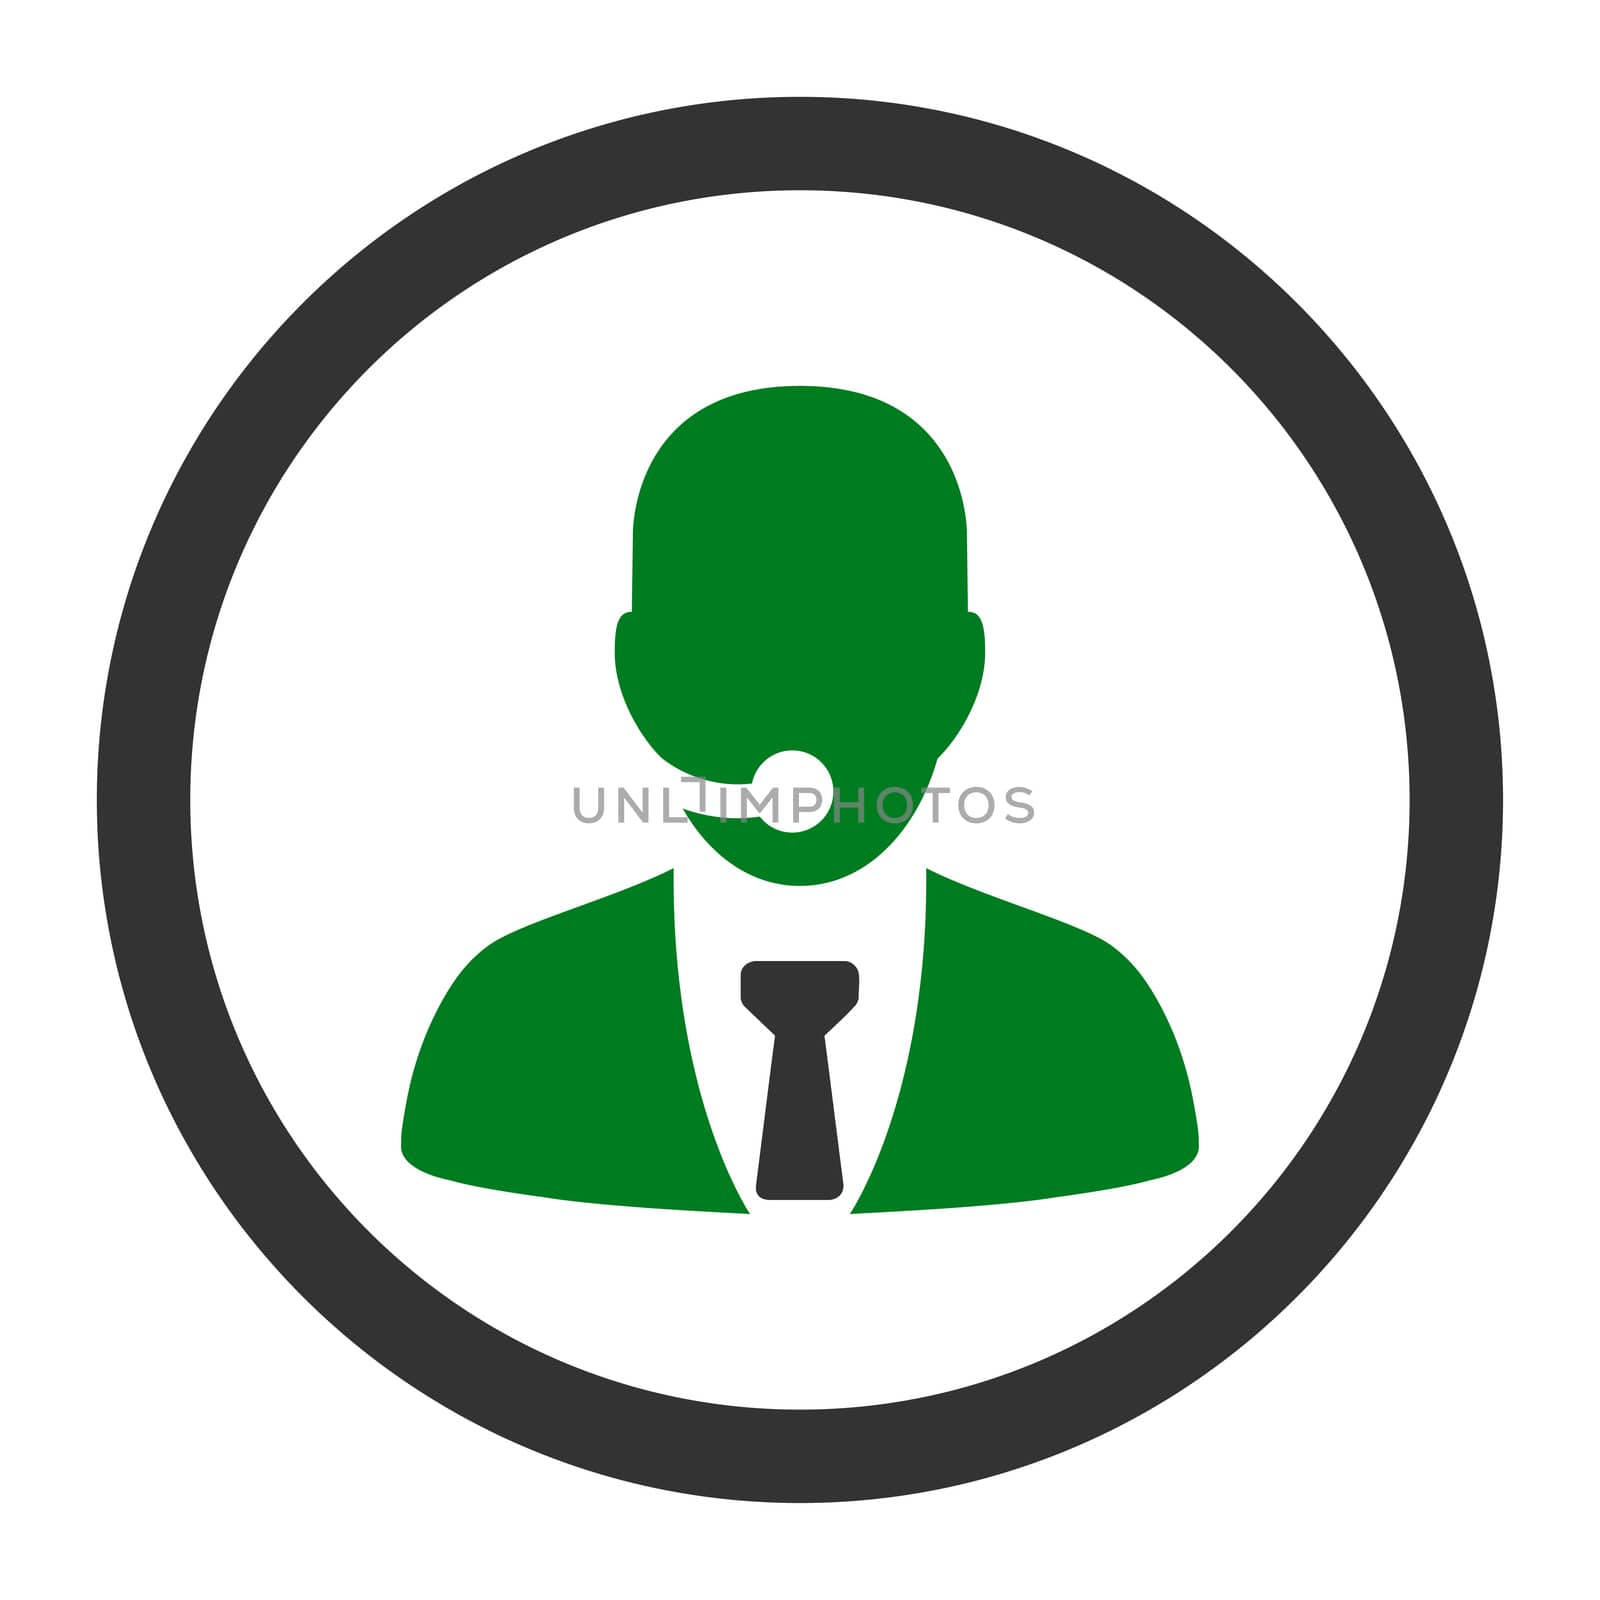 Call center operator glyph icon. This rounded flat symbol is drawn with green and gray colors on a white background.